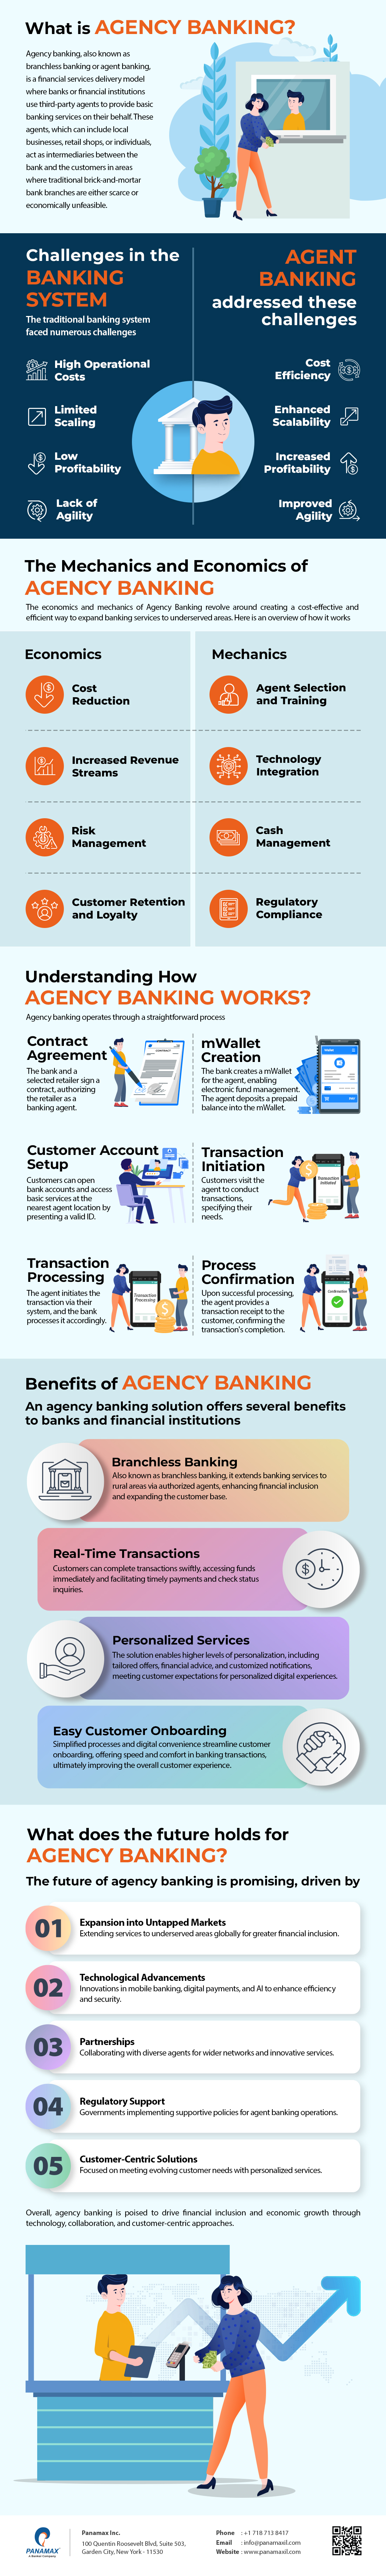 Agency Banking Infographic